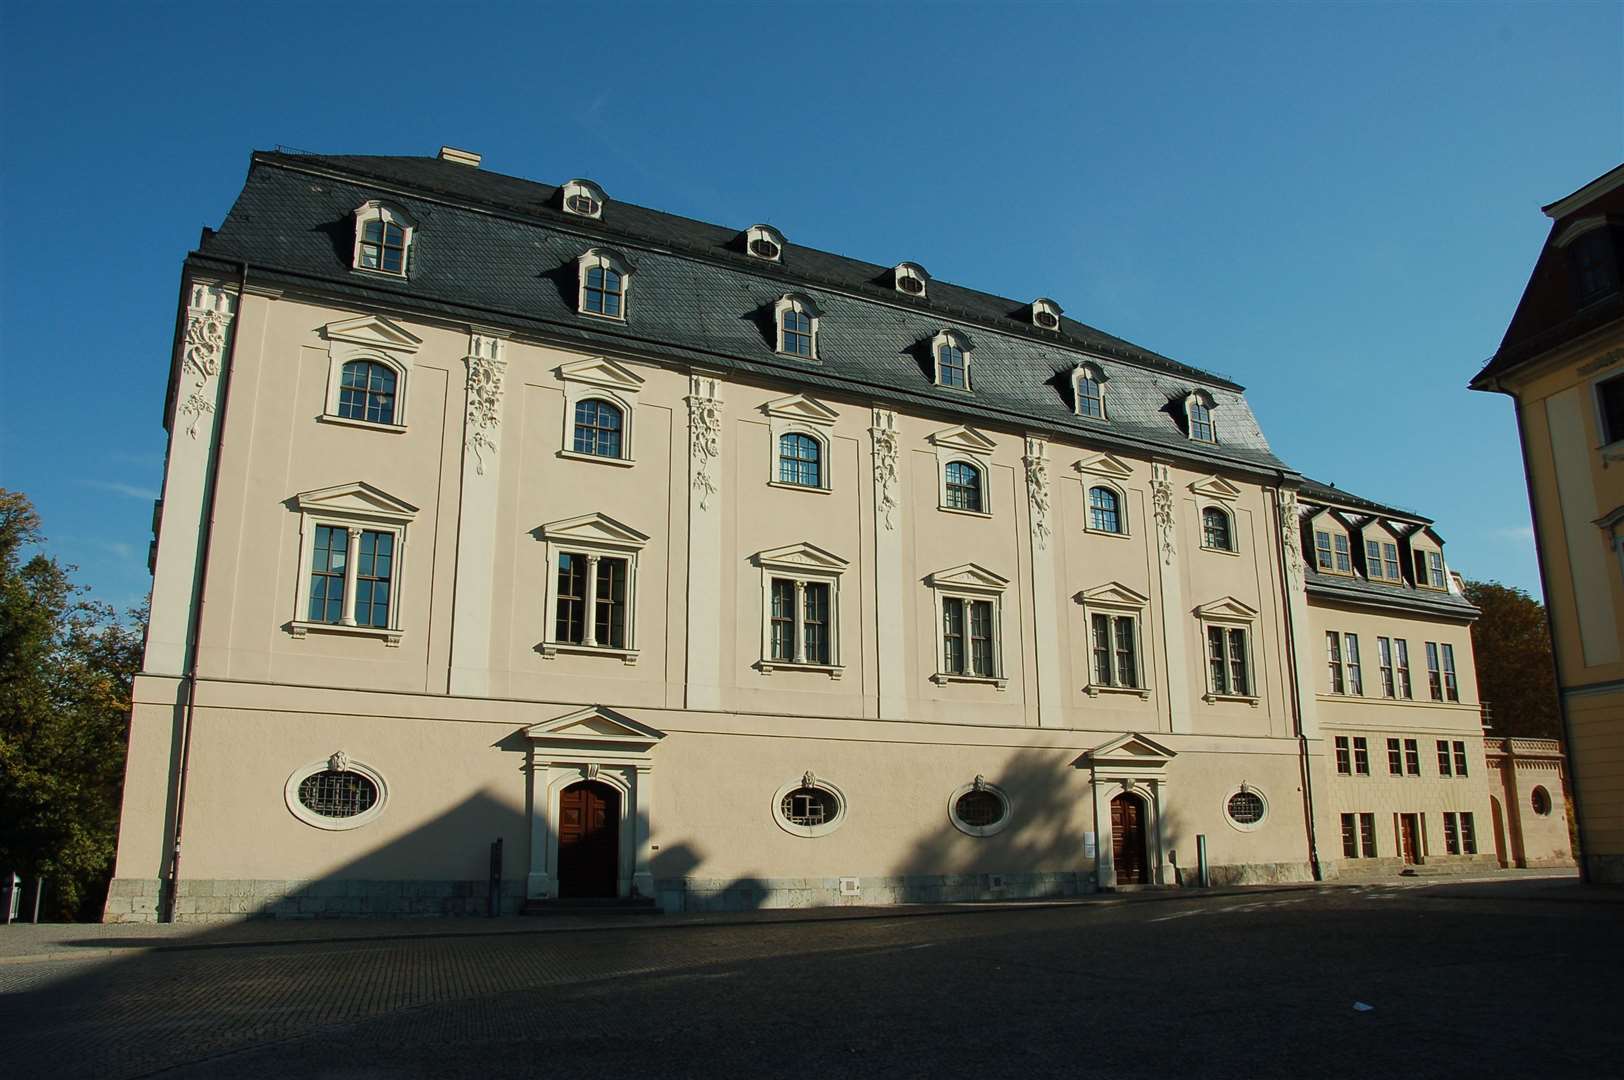 The Anna Amalia library in Weimar.